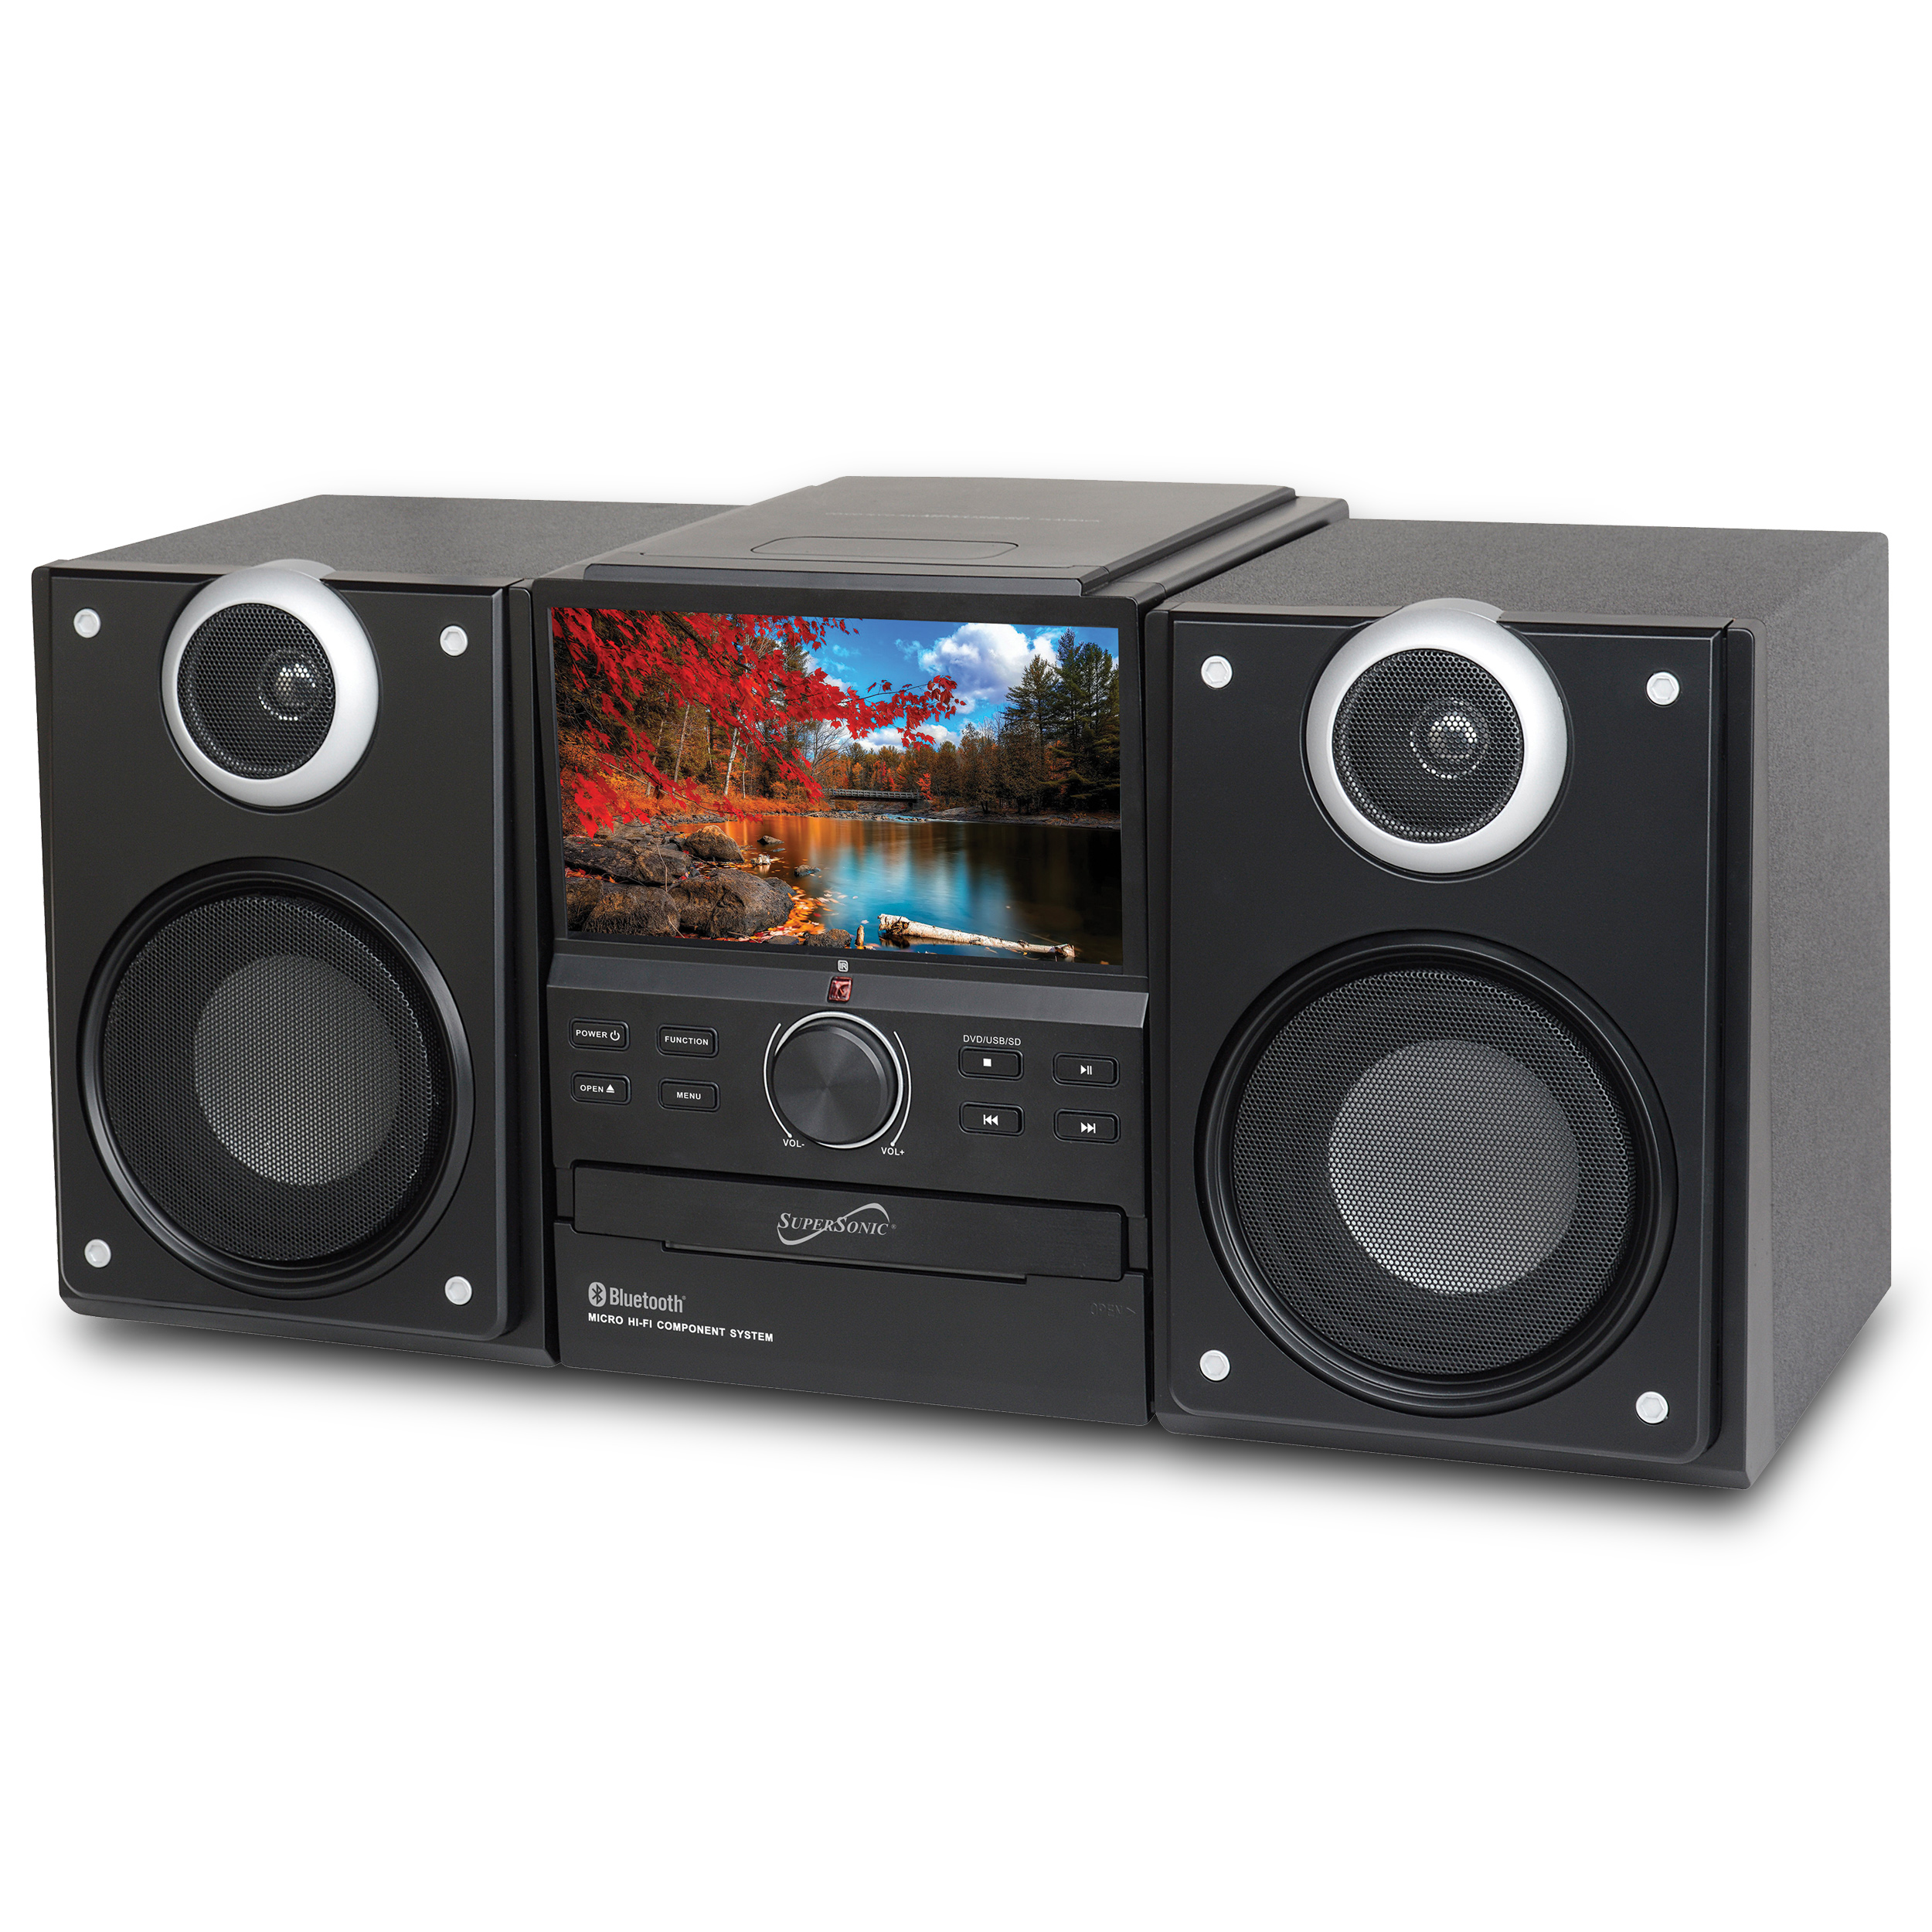 Supersonic Hi-Fi Audio Micro System with Bluetooth and DVD Player - image 1 of 5